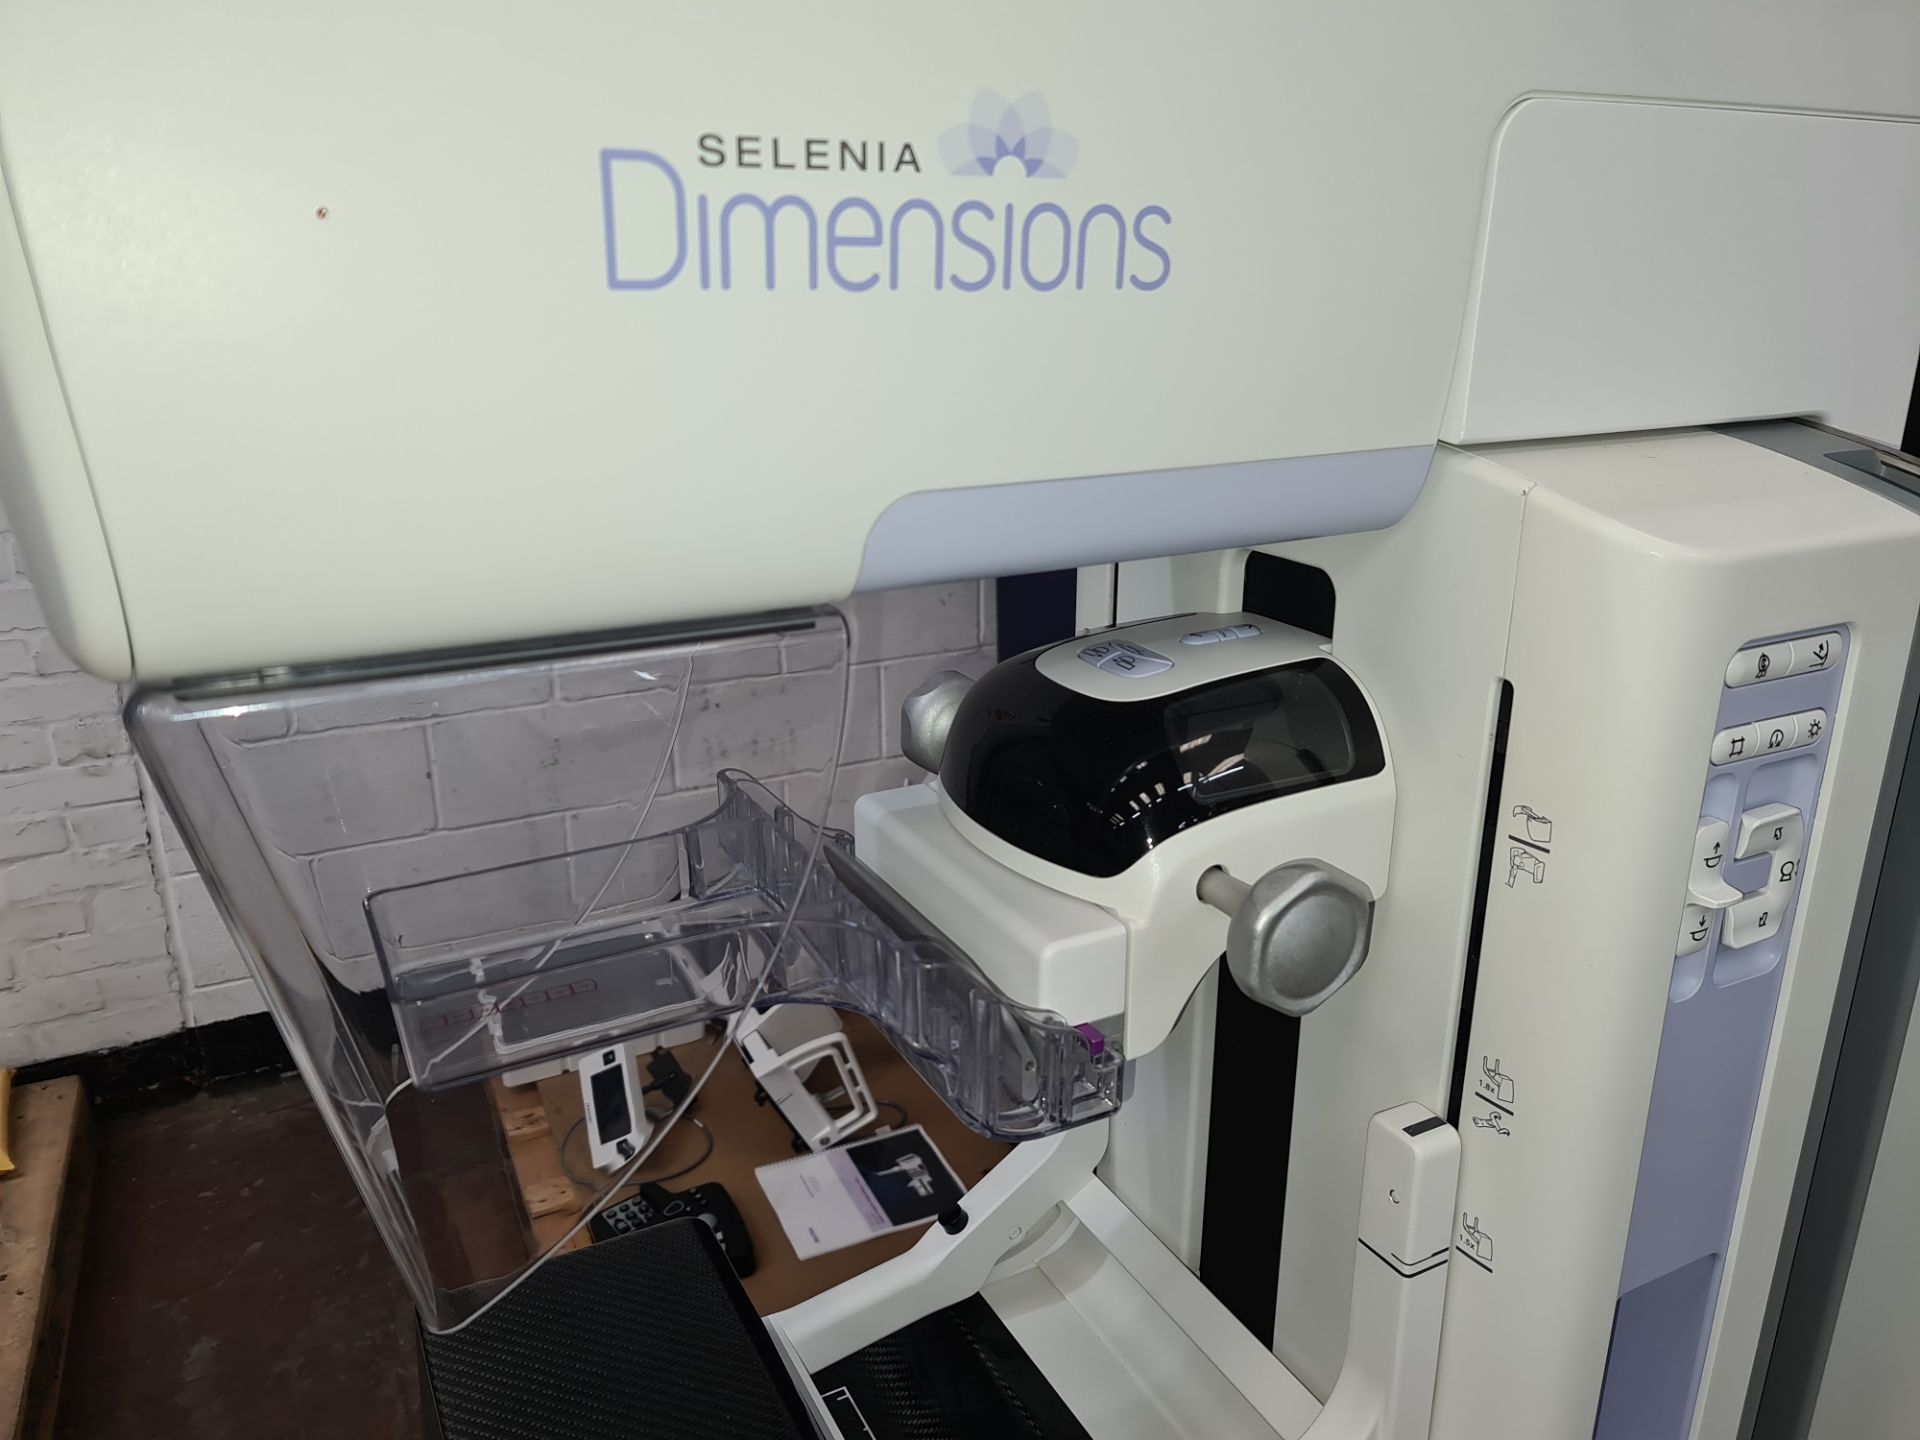 Selenia Dimensions Mammography System (2D/3D) including Securview-DX 400 and mammography chair - Image 18 of 64